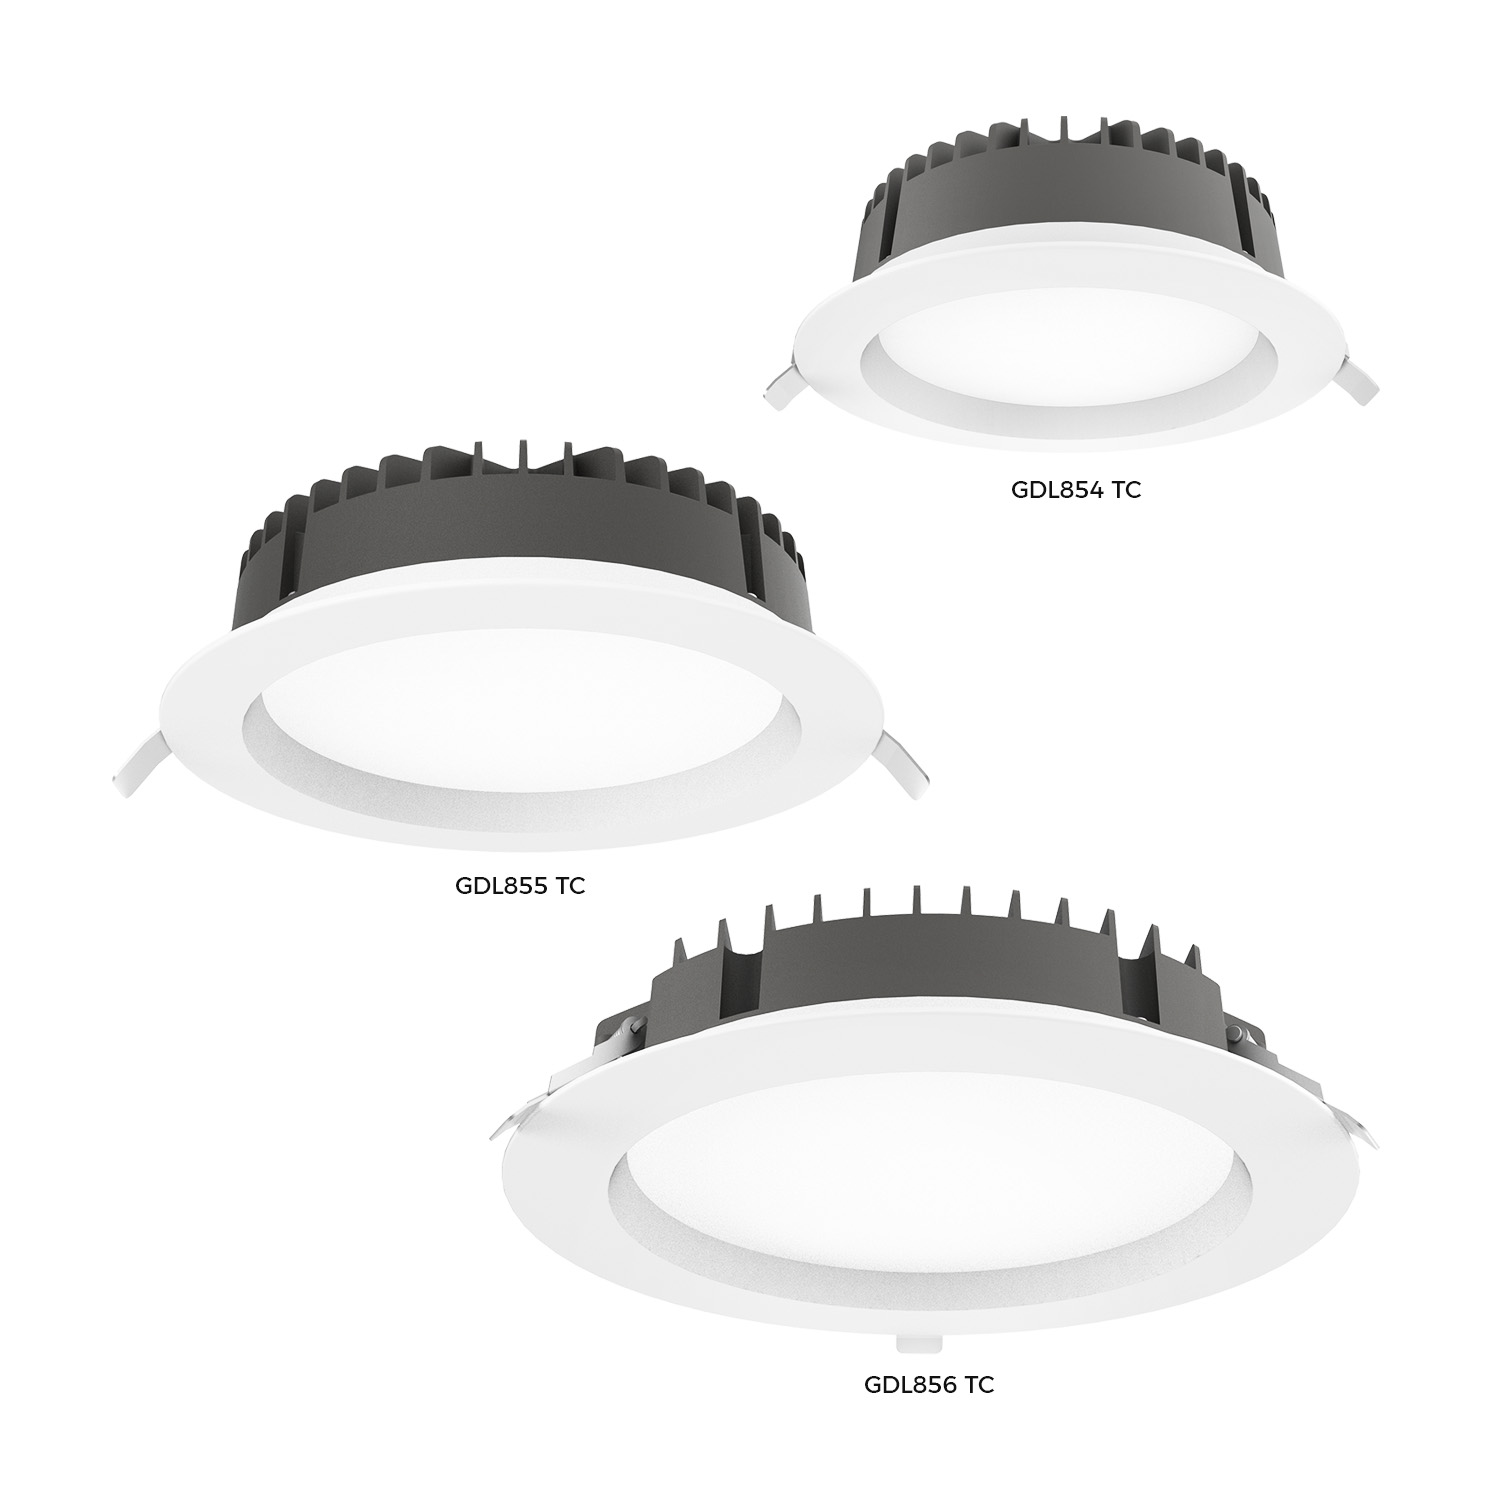 MERCURY LED DOWNLIGHT WHITE 28W/39W, 3000/4000/5700K, IP54, DIMMABLE